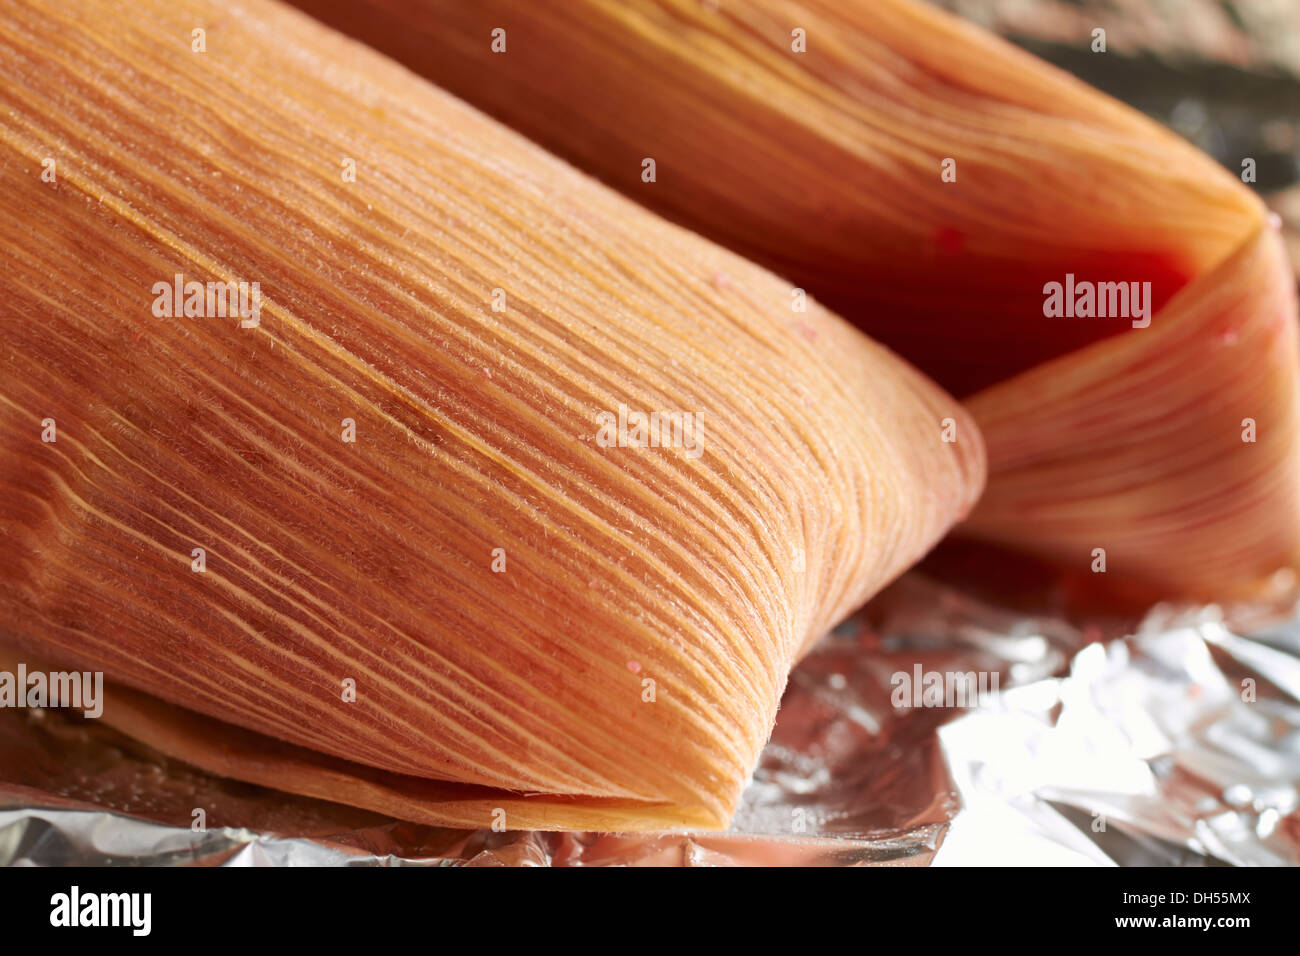 Sweet Tamale mexicain Banque D'Images